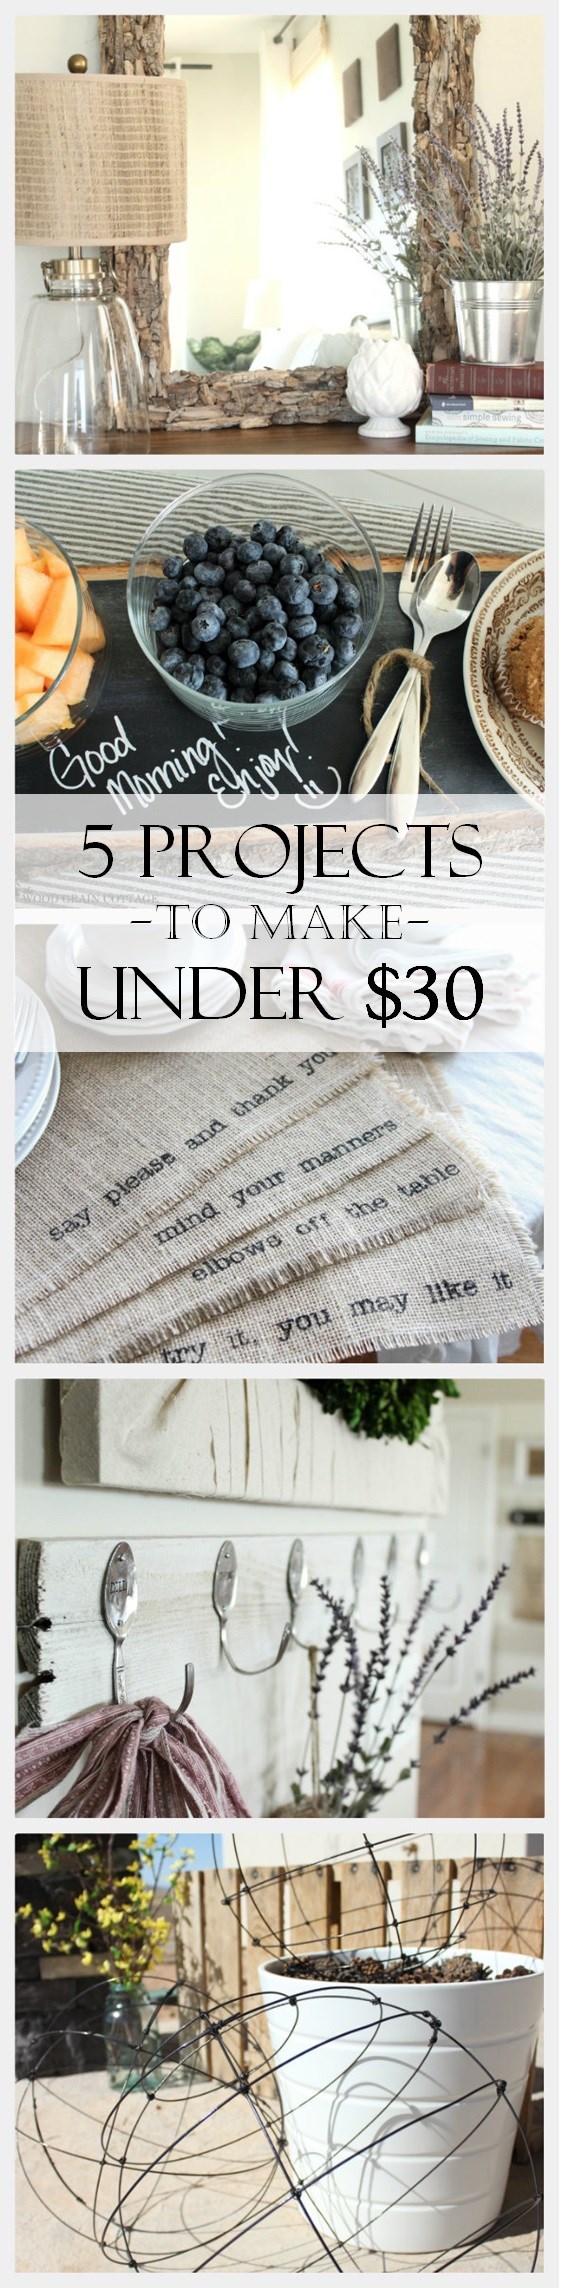 5 Projects to Make Under $30 by The Wood Grain Cottage